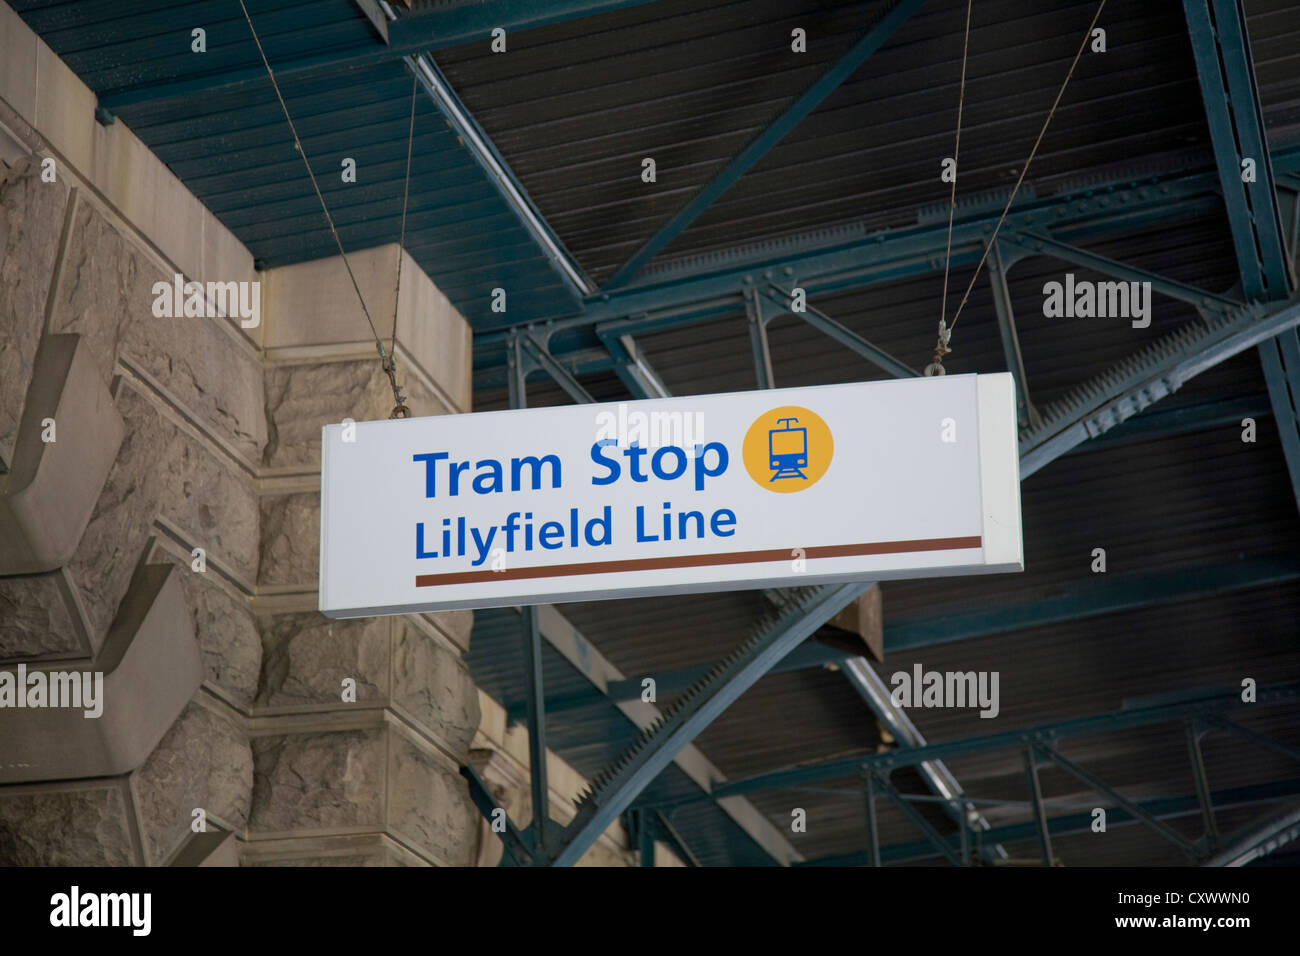 wayfinding signage for the tram on the lilyfield line at Central Station, sydney,australia Stock Photo